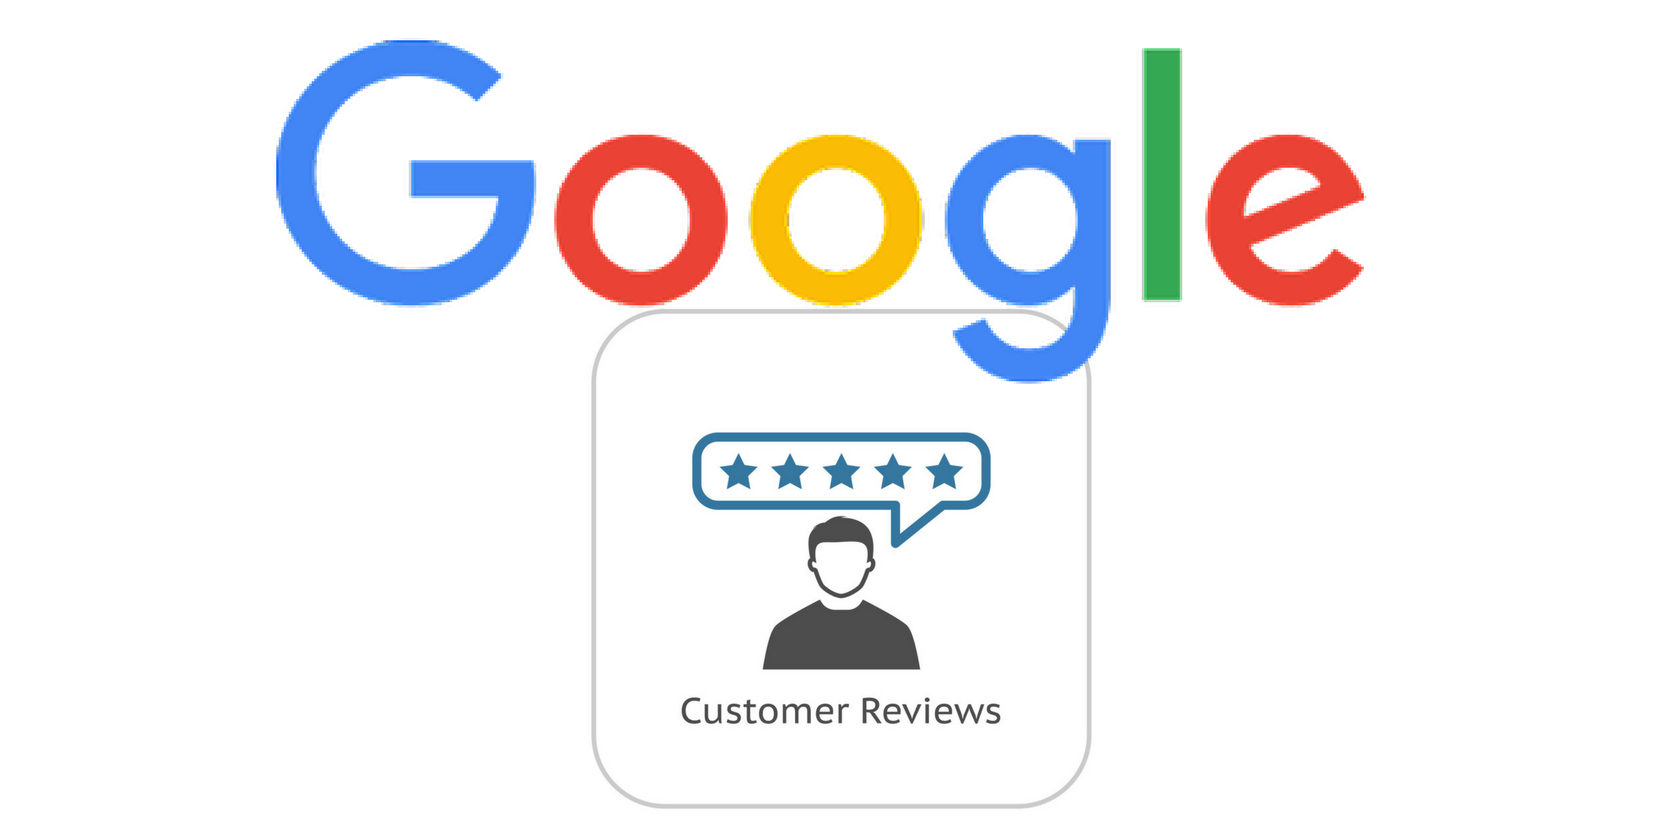 Google business review not showing up